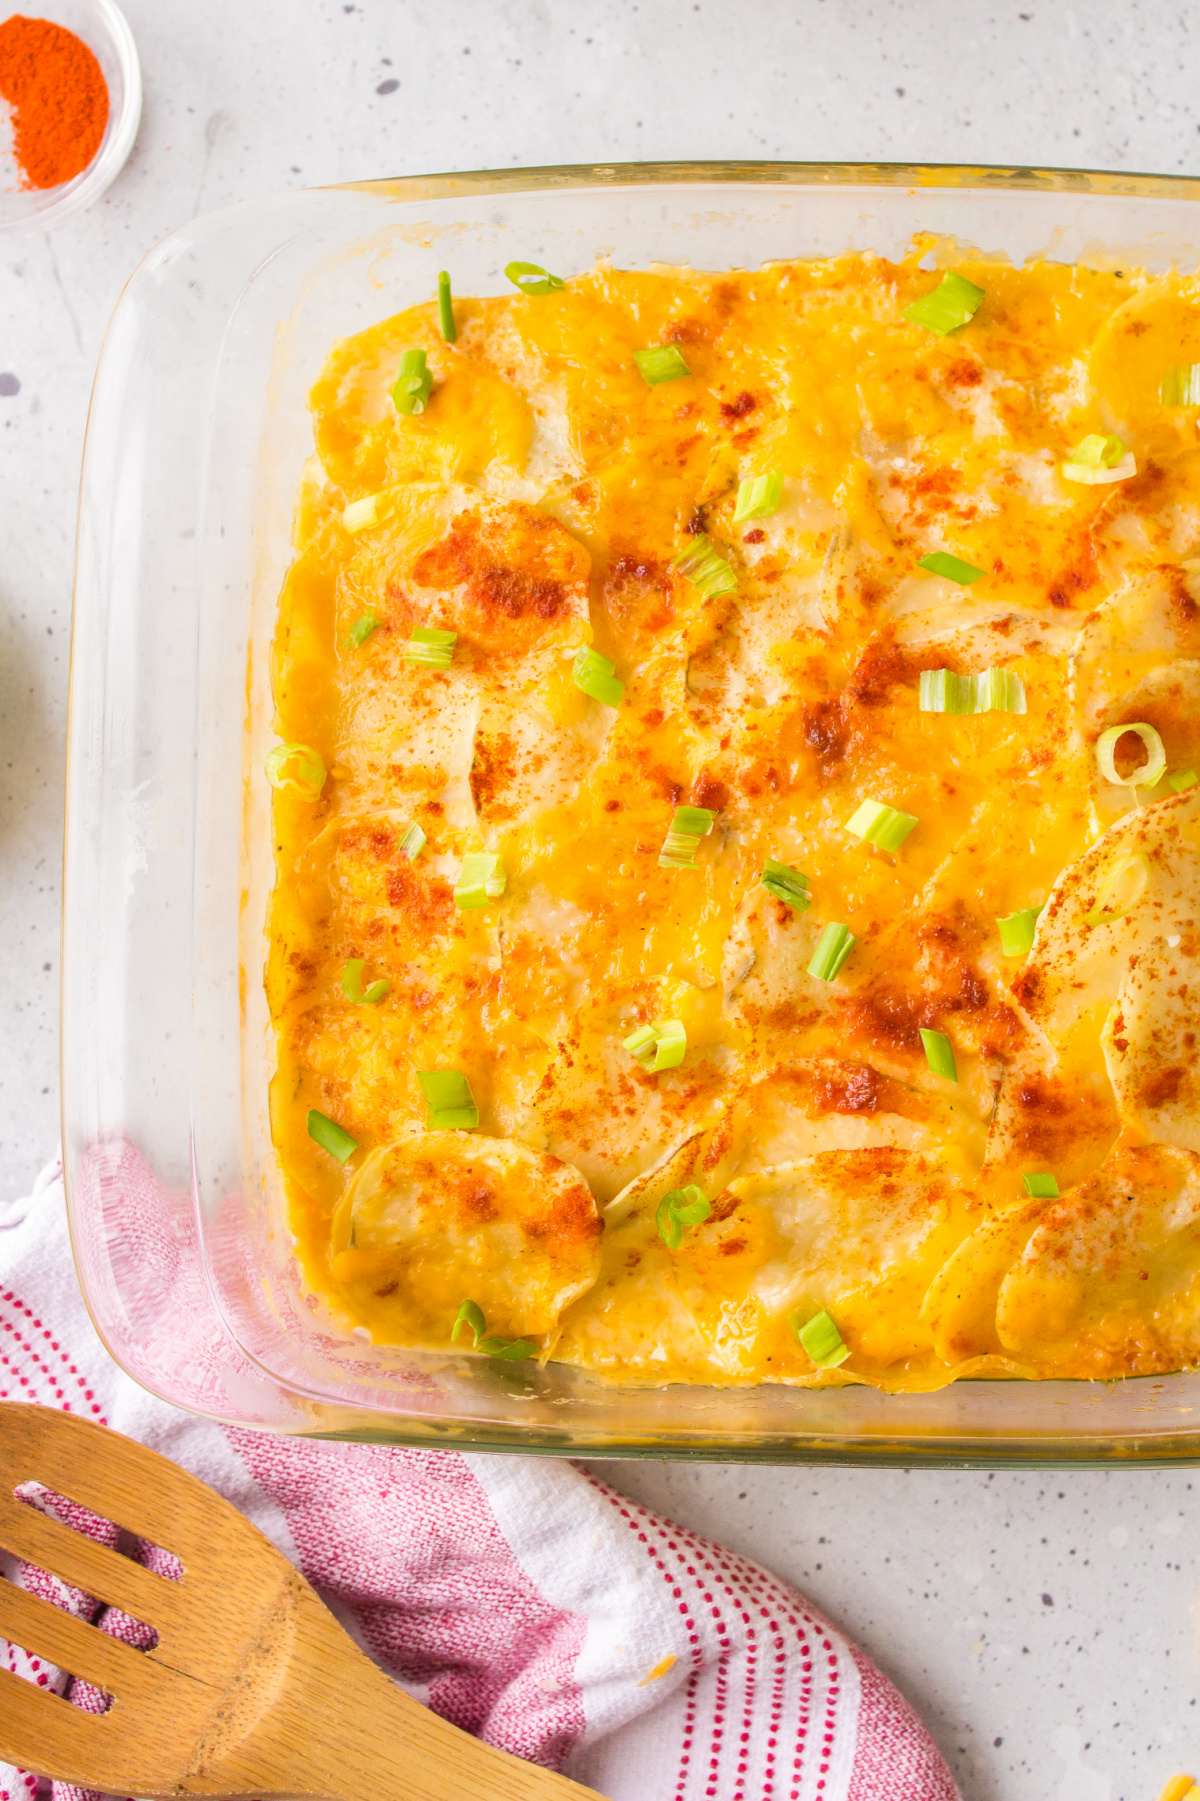 microwave scalloped potatoes in baking dish